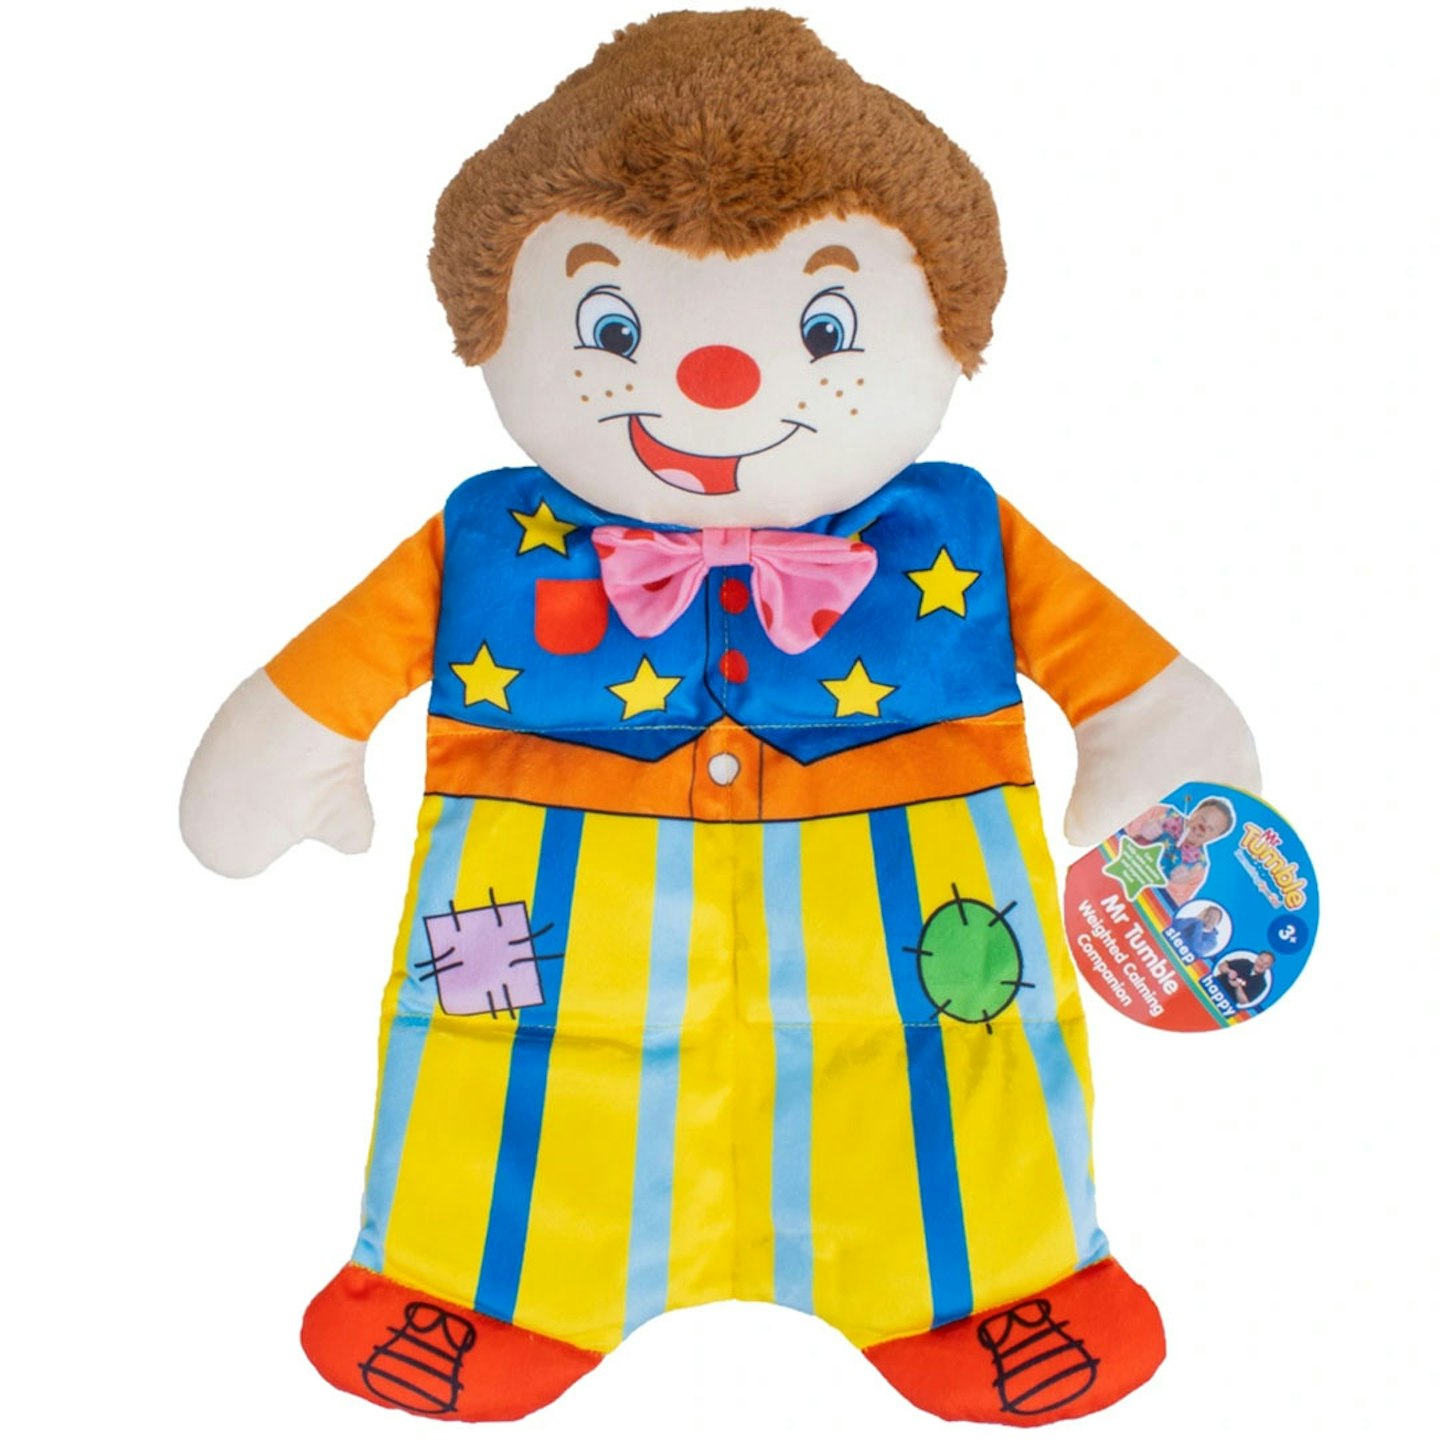 Mr Tumble Weighted Calming Companion Plush